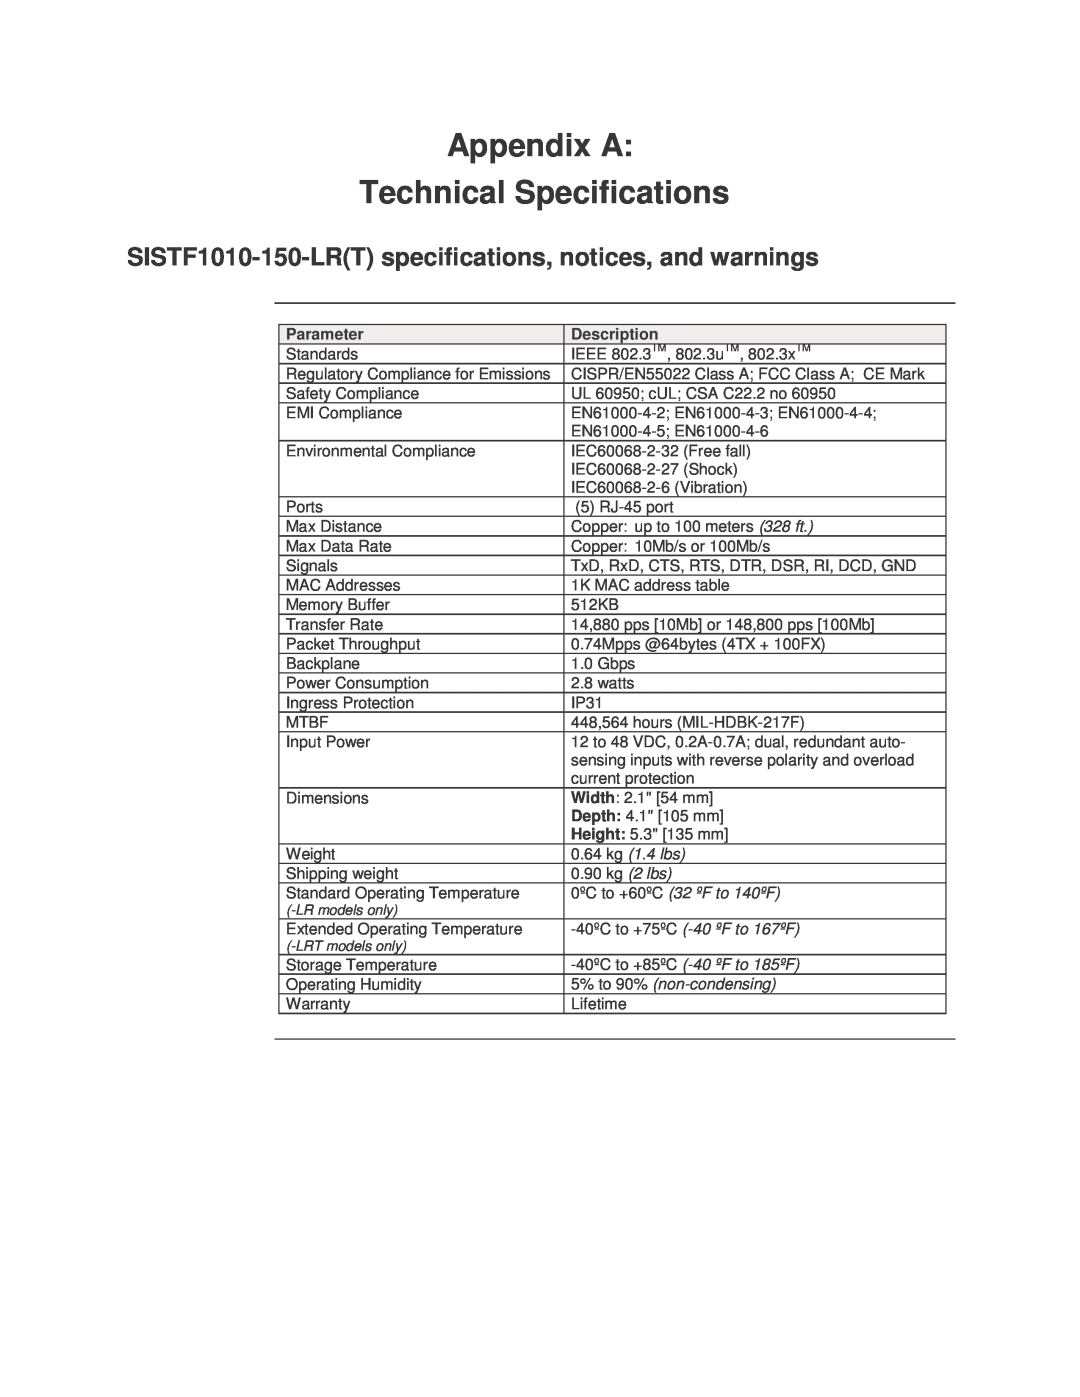 Transition Networks SISTF1010-150-LR(T) installation manual Appendix A Technical Specifications 